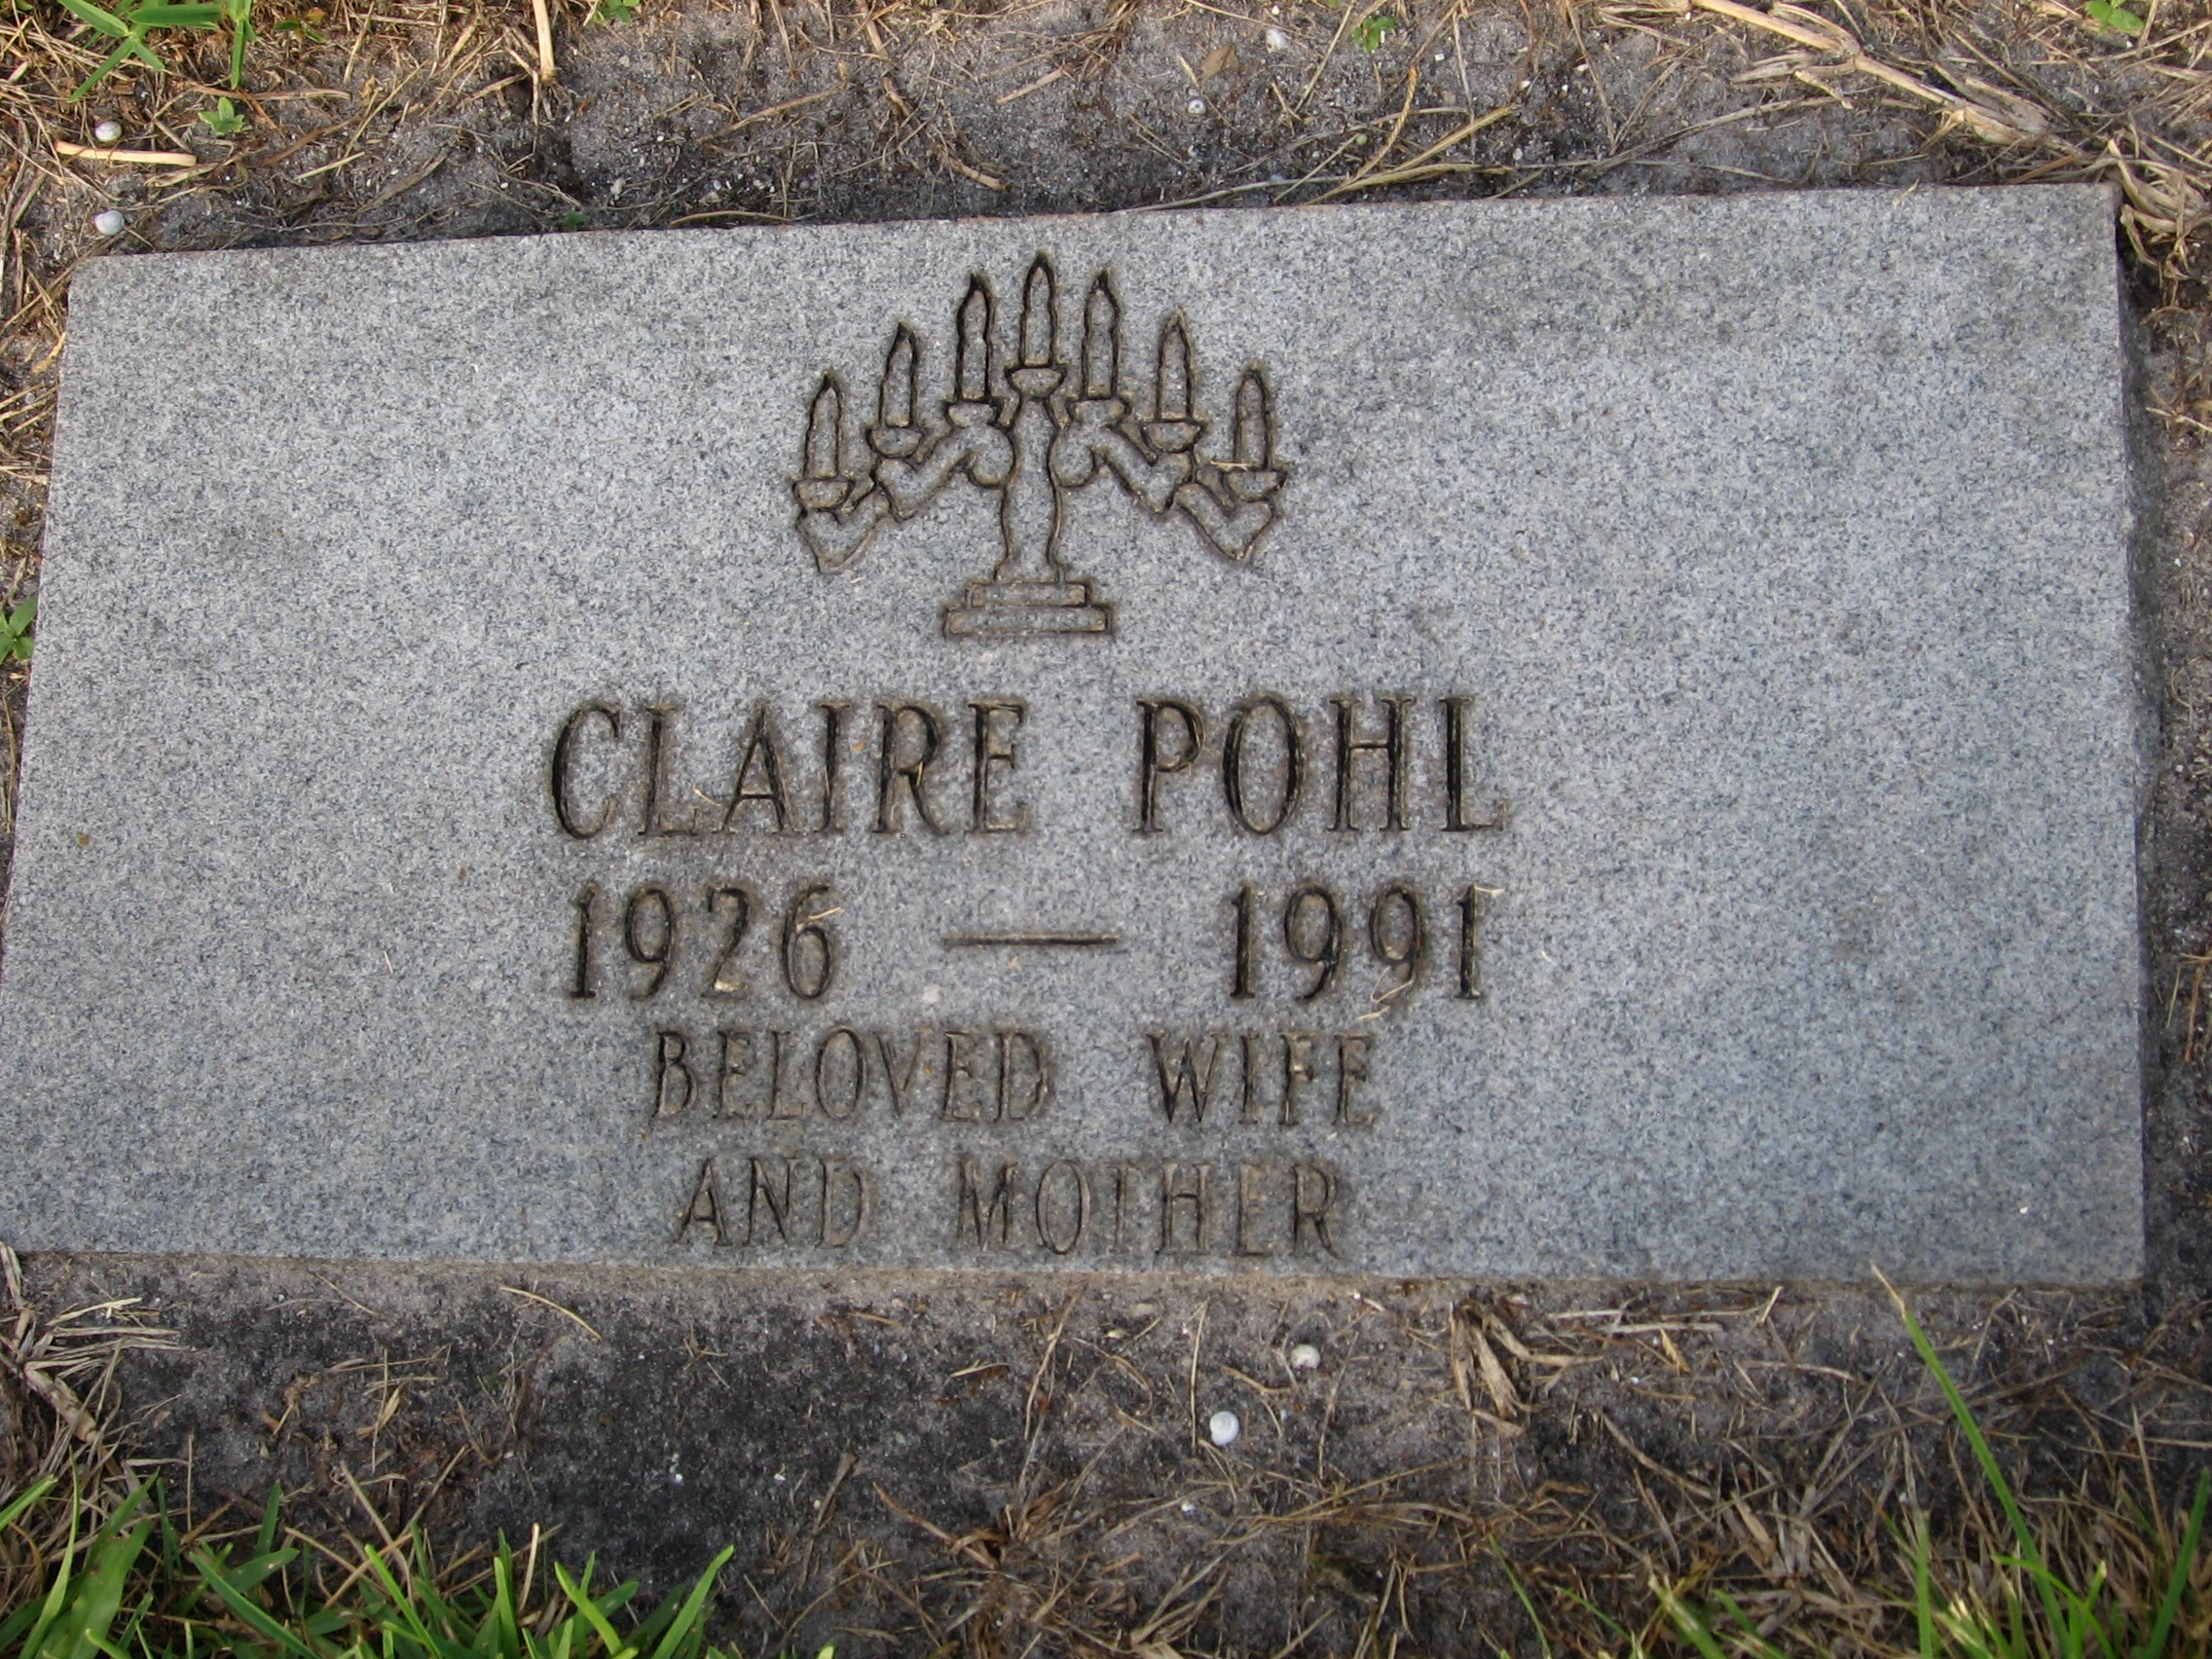 Claire Pohl